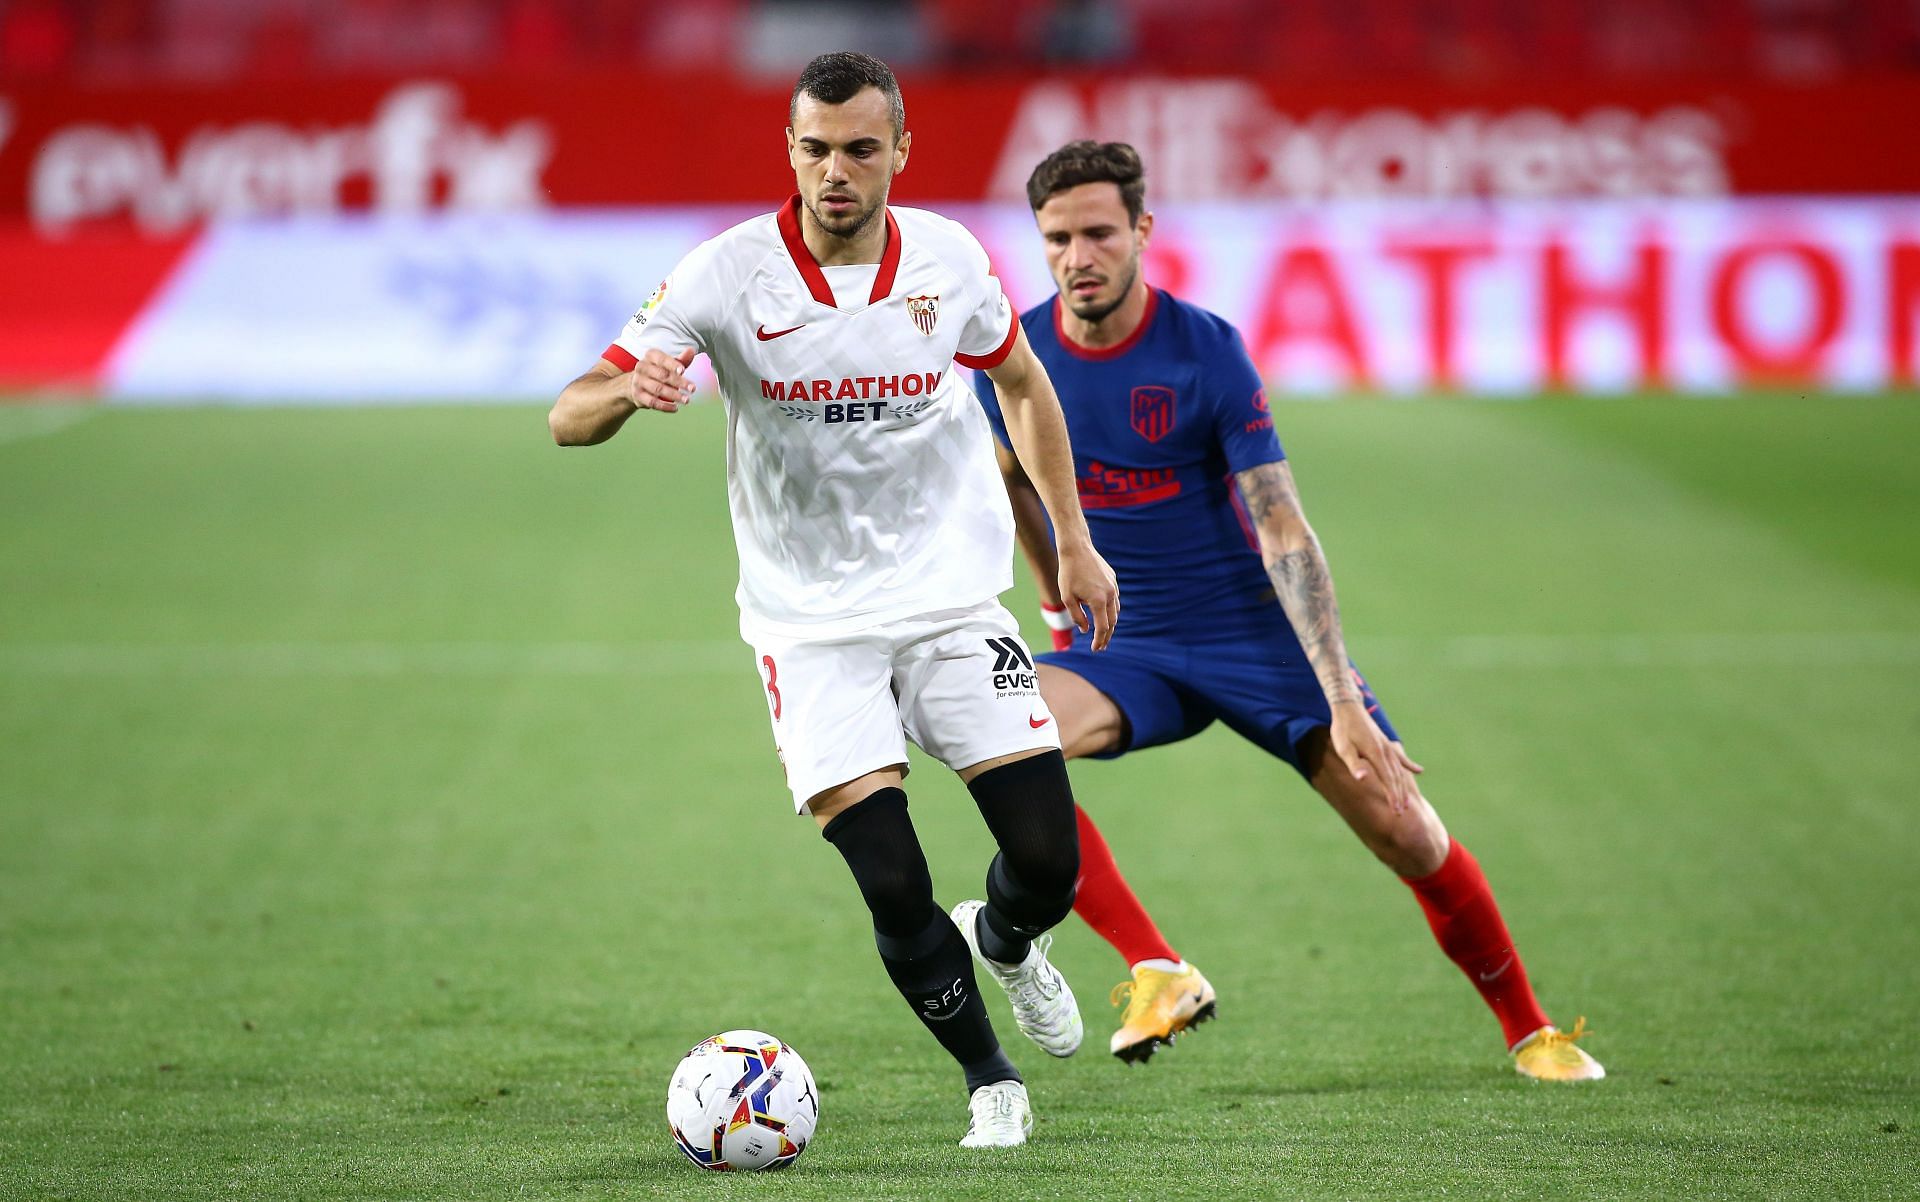 Sevilla take on Atletico Madrid this weekend